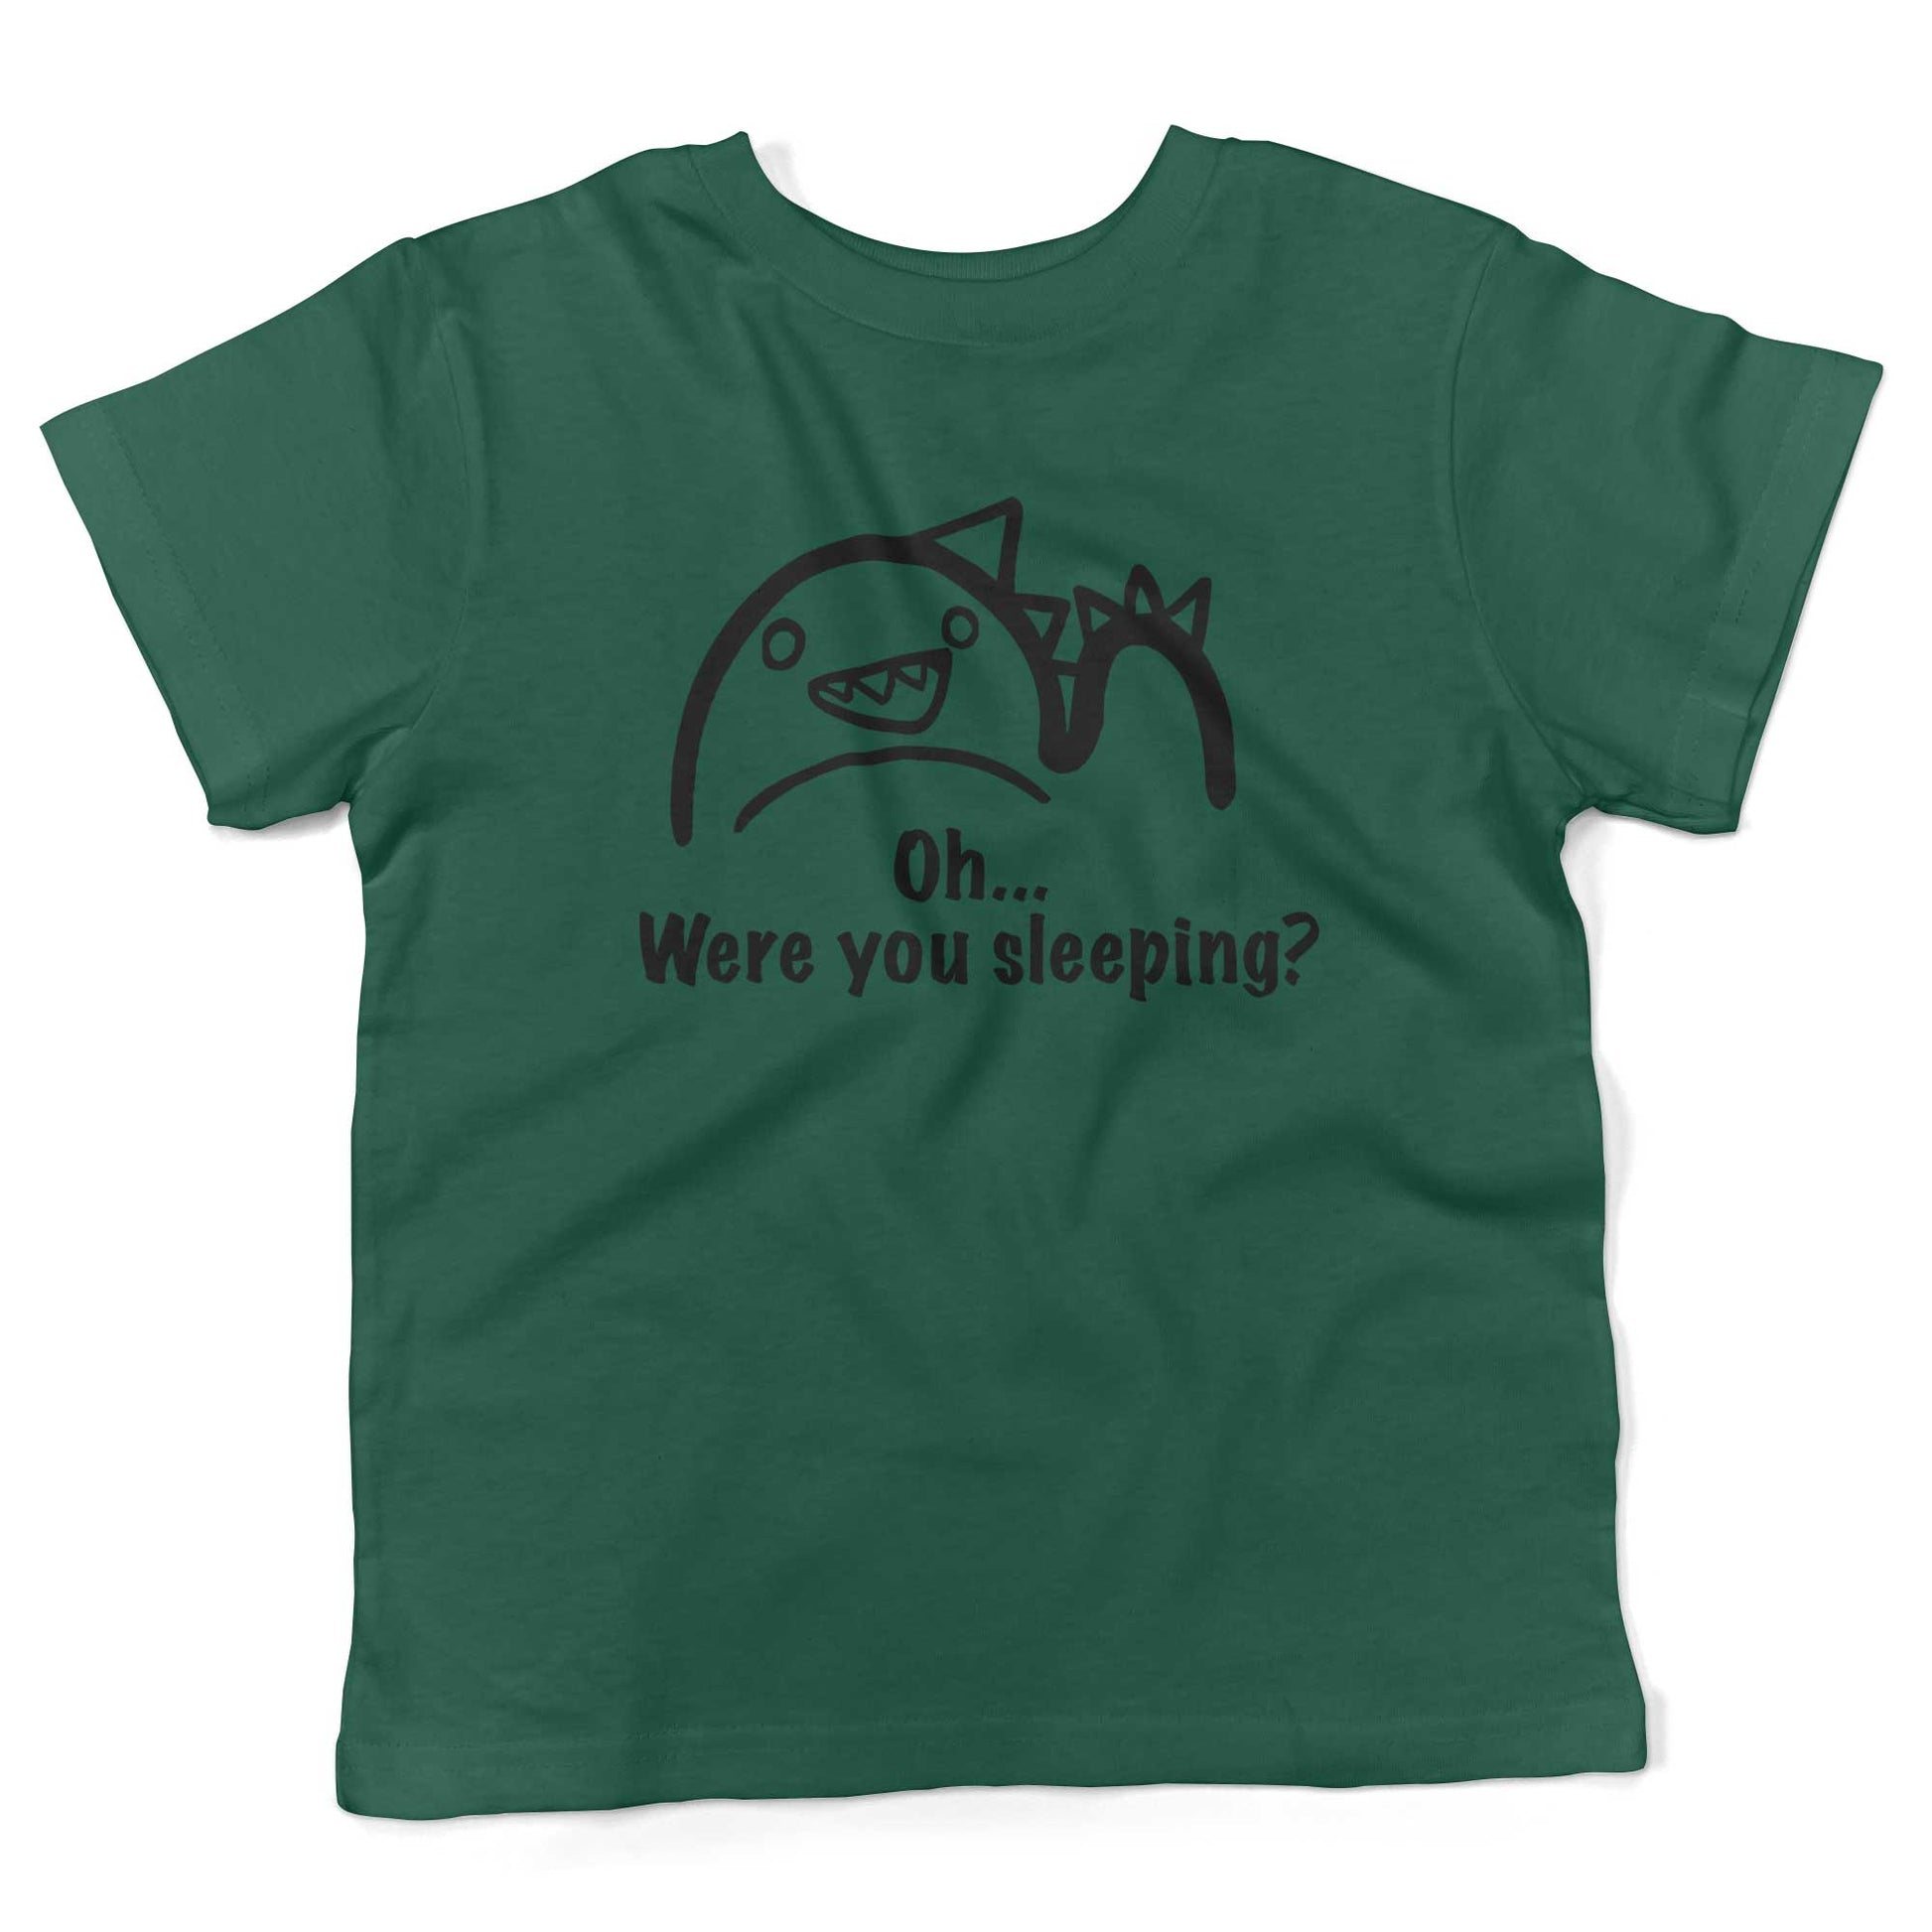 Oh...Were you sleeping? Toddler Shirt-Kelly Green-2T